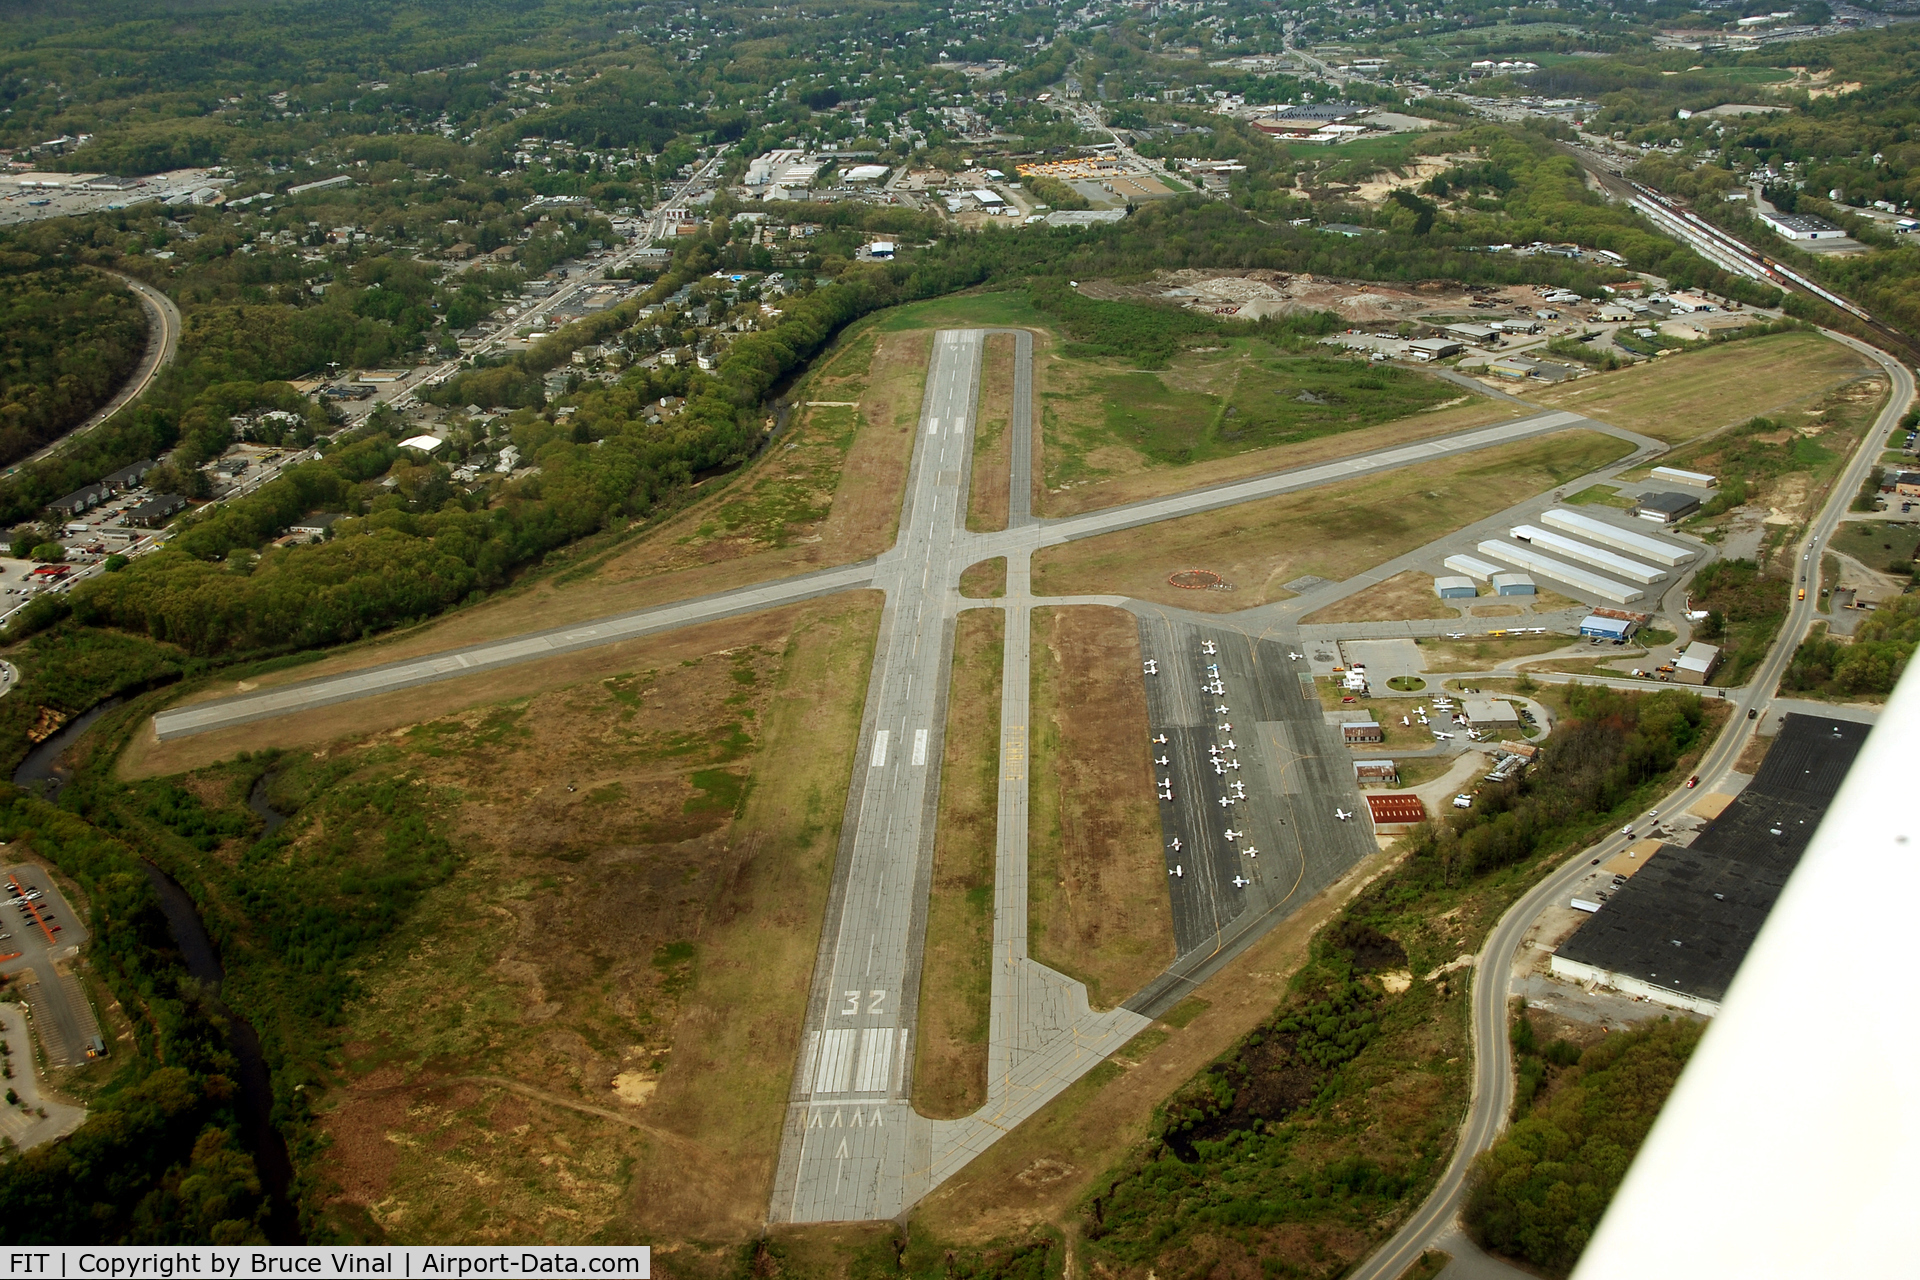 Fitchburg Municipal Airport (FIT) - Fitchburg Mun. Airport from a Cherokee